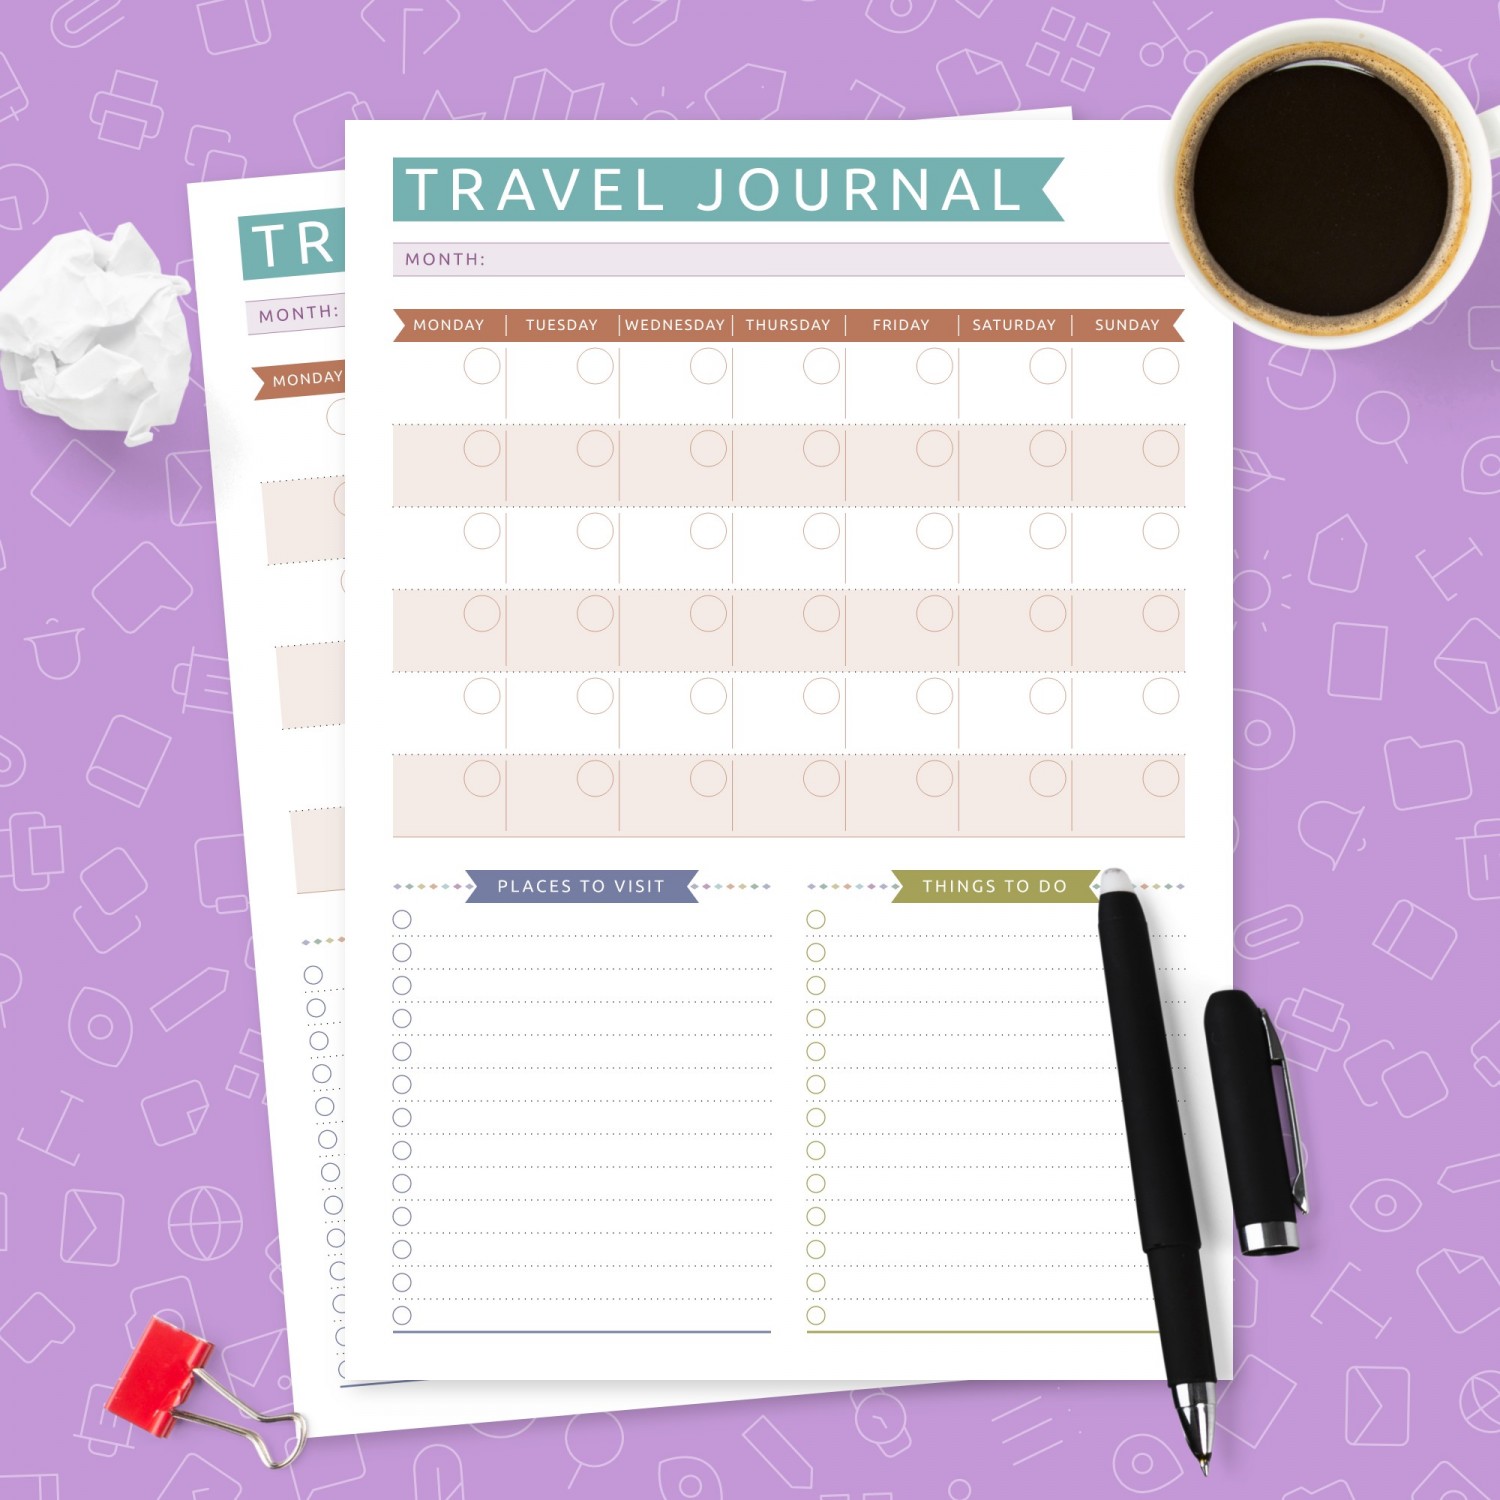 travel journal template travel journal images